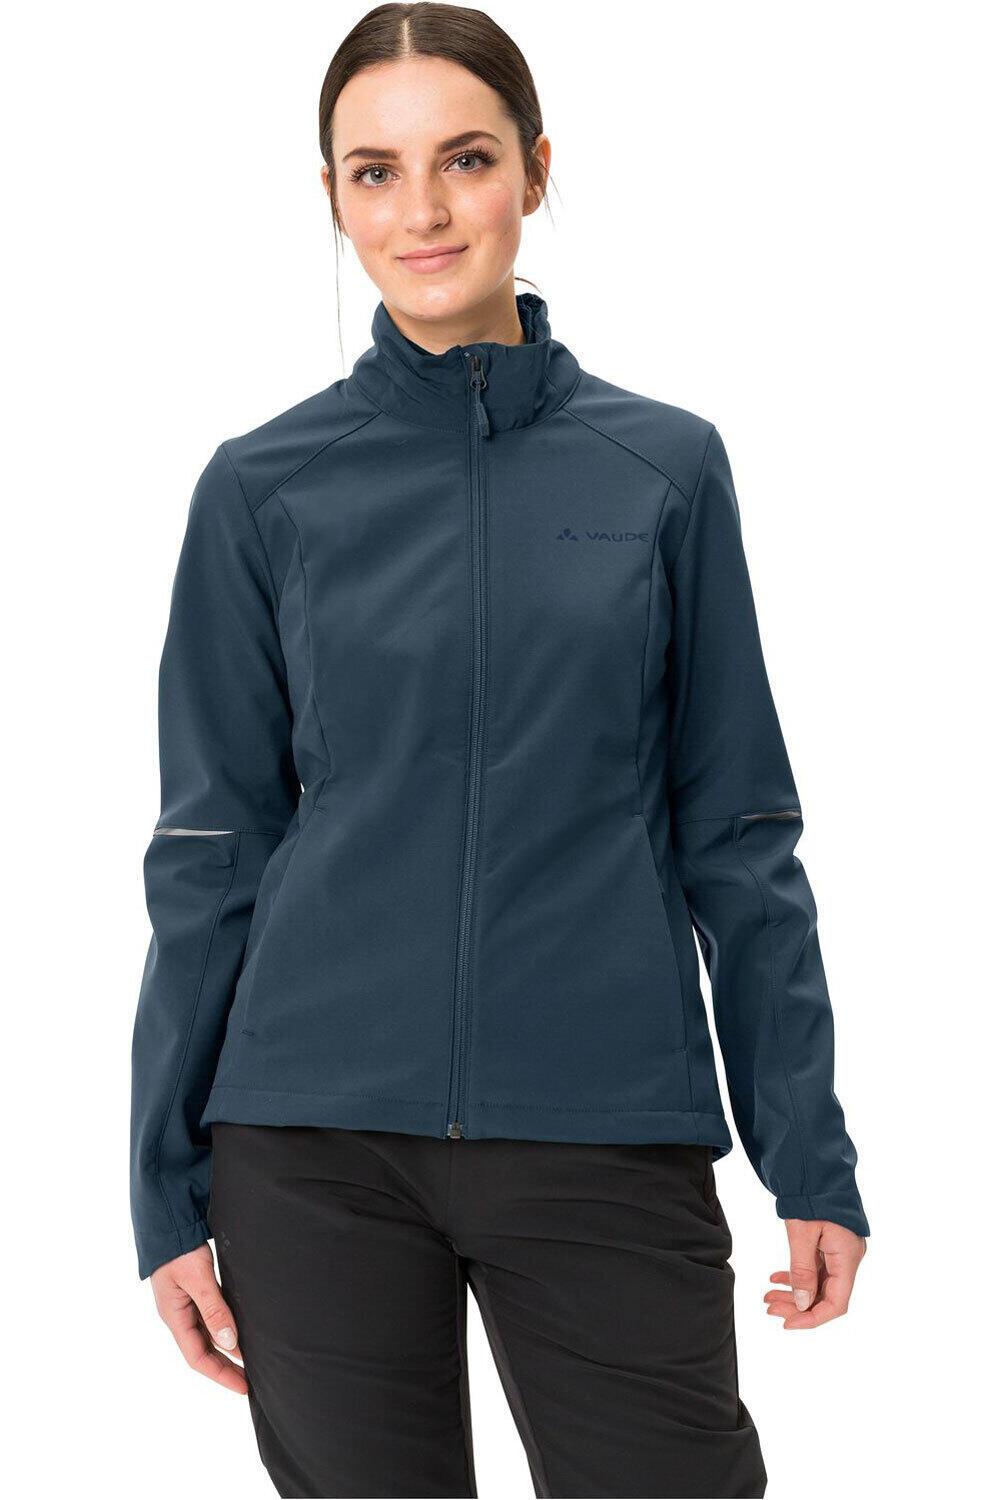 Vaude chaqueta impermeable ciclismo mujer Women's Wintry Jacket IV vista frontal